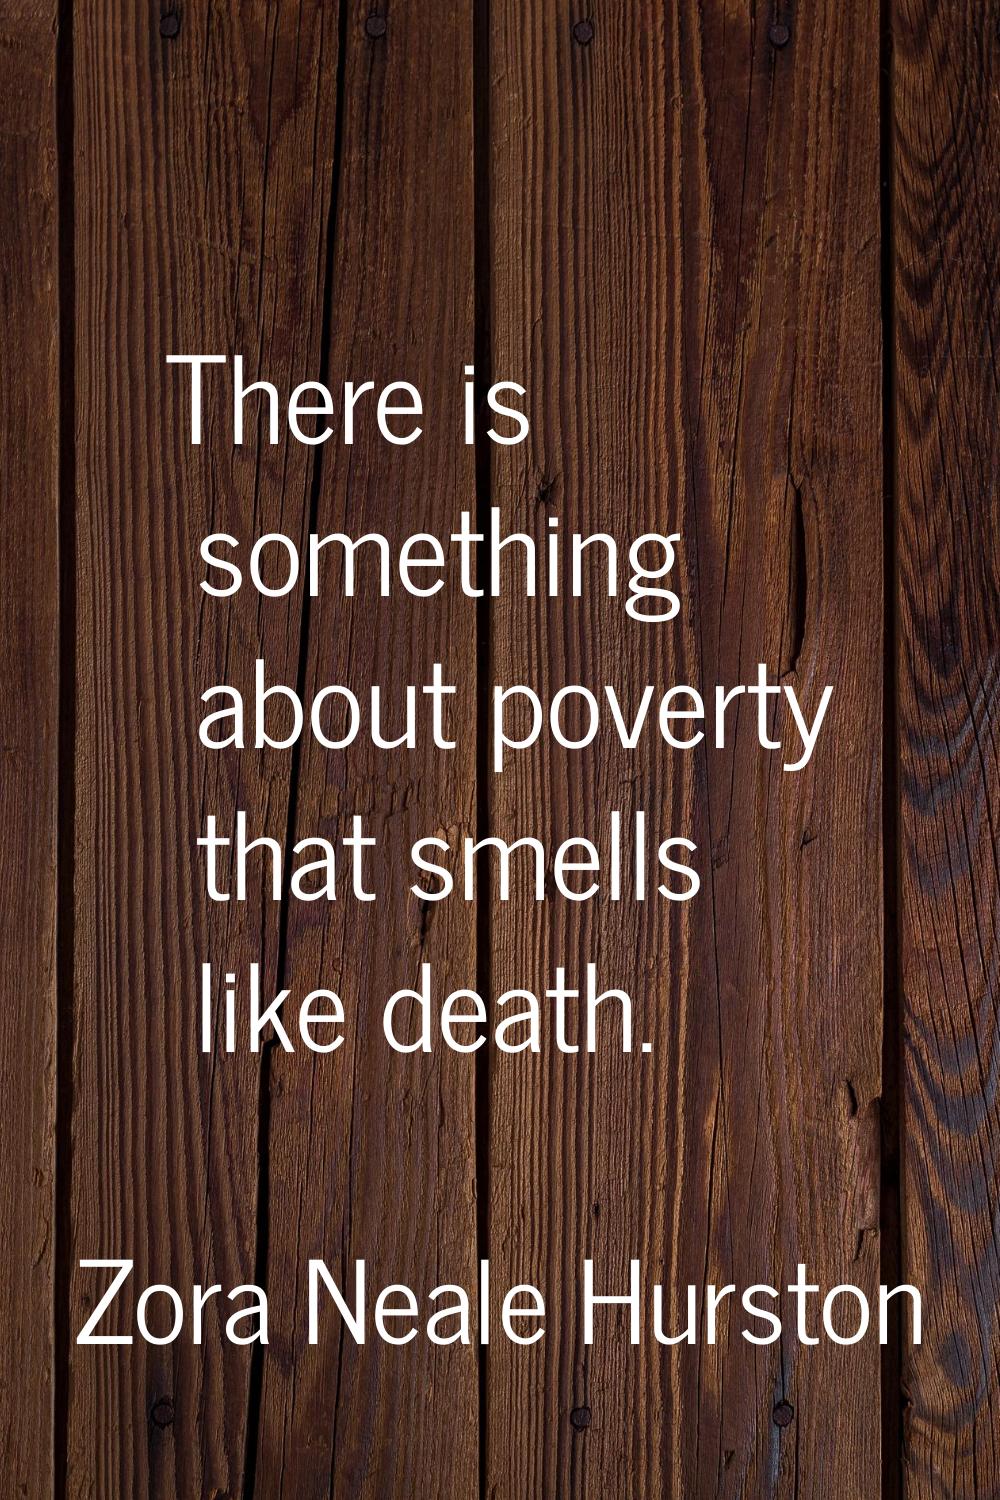 There is something about poverty that smells like death.